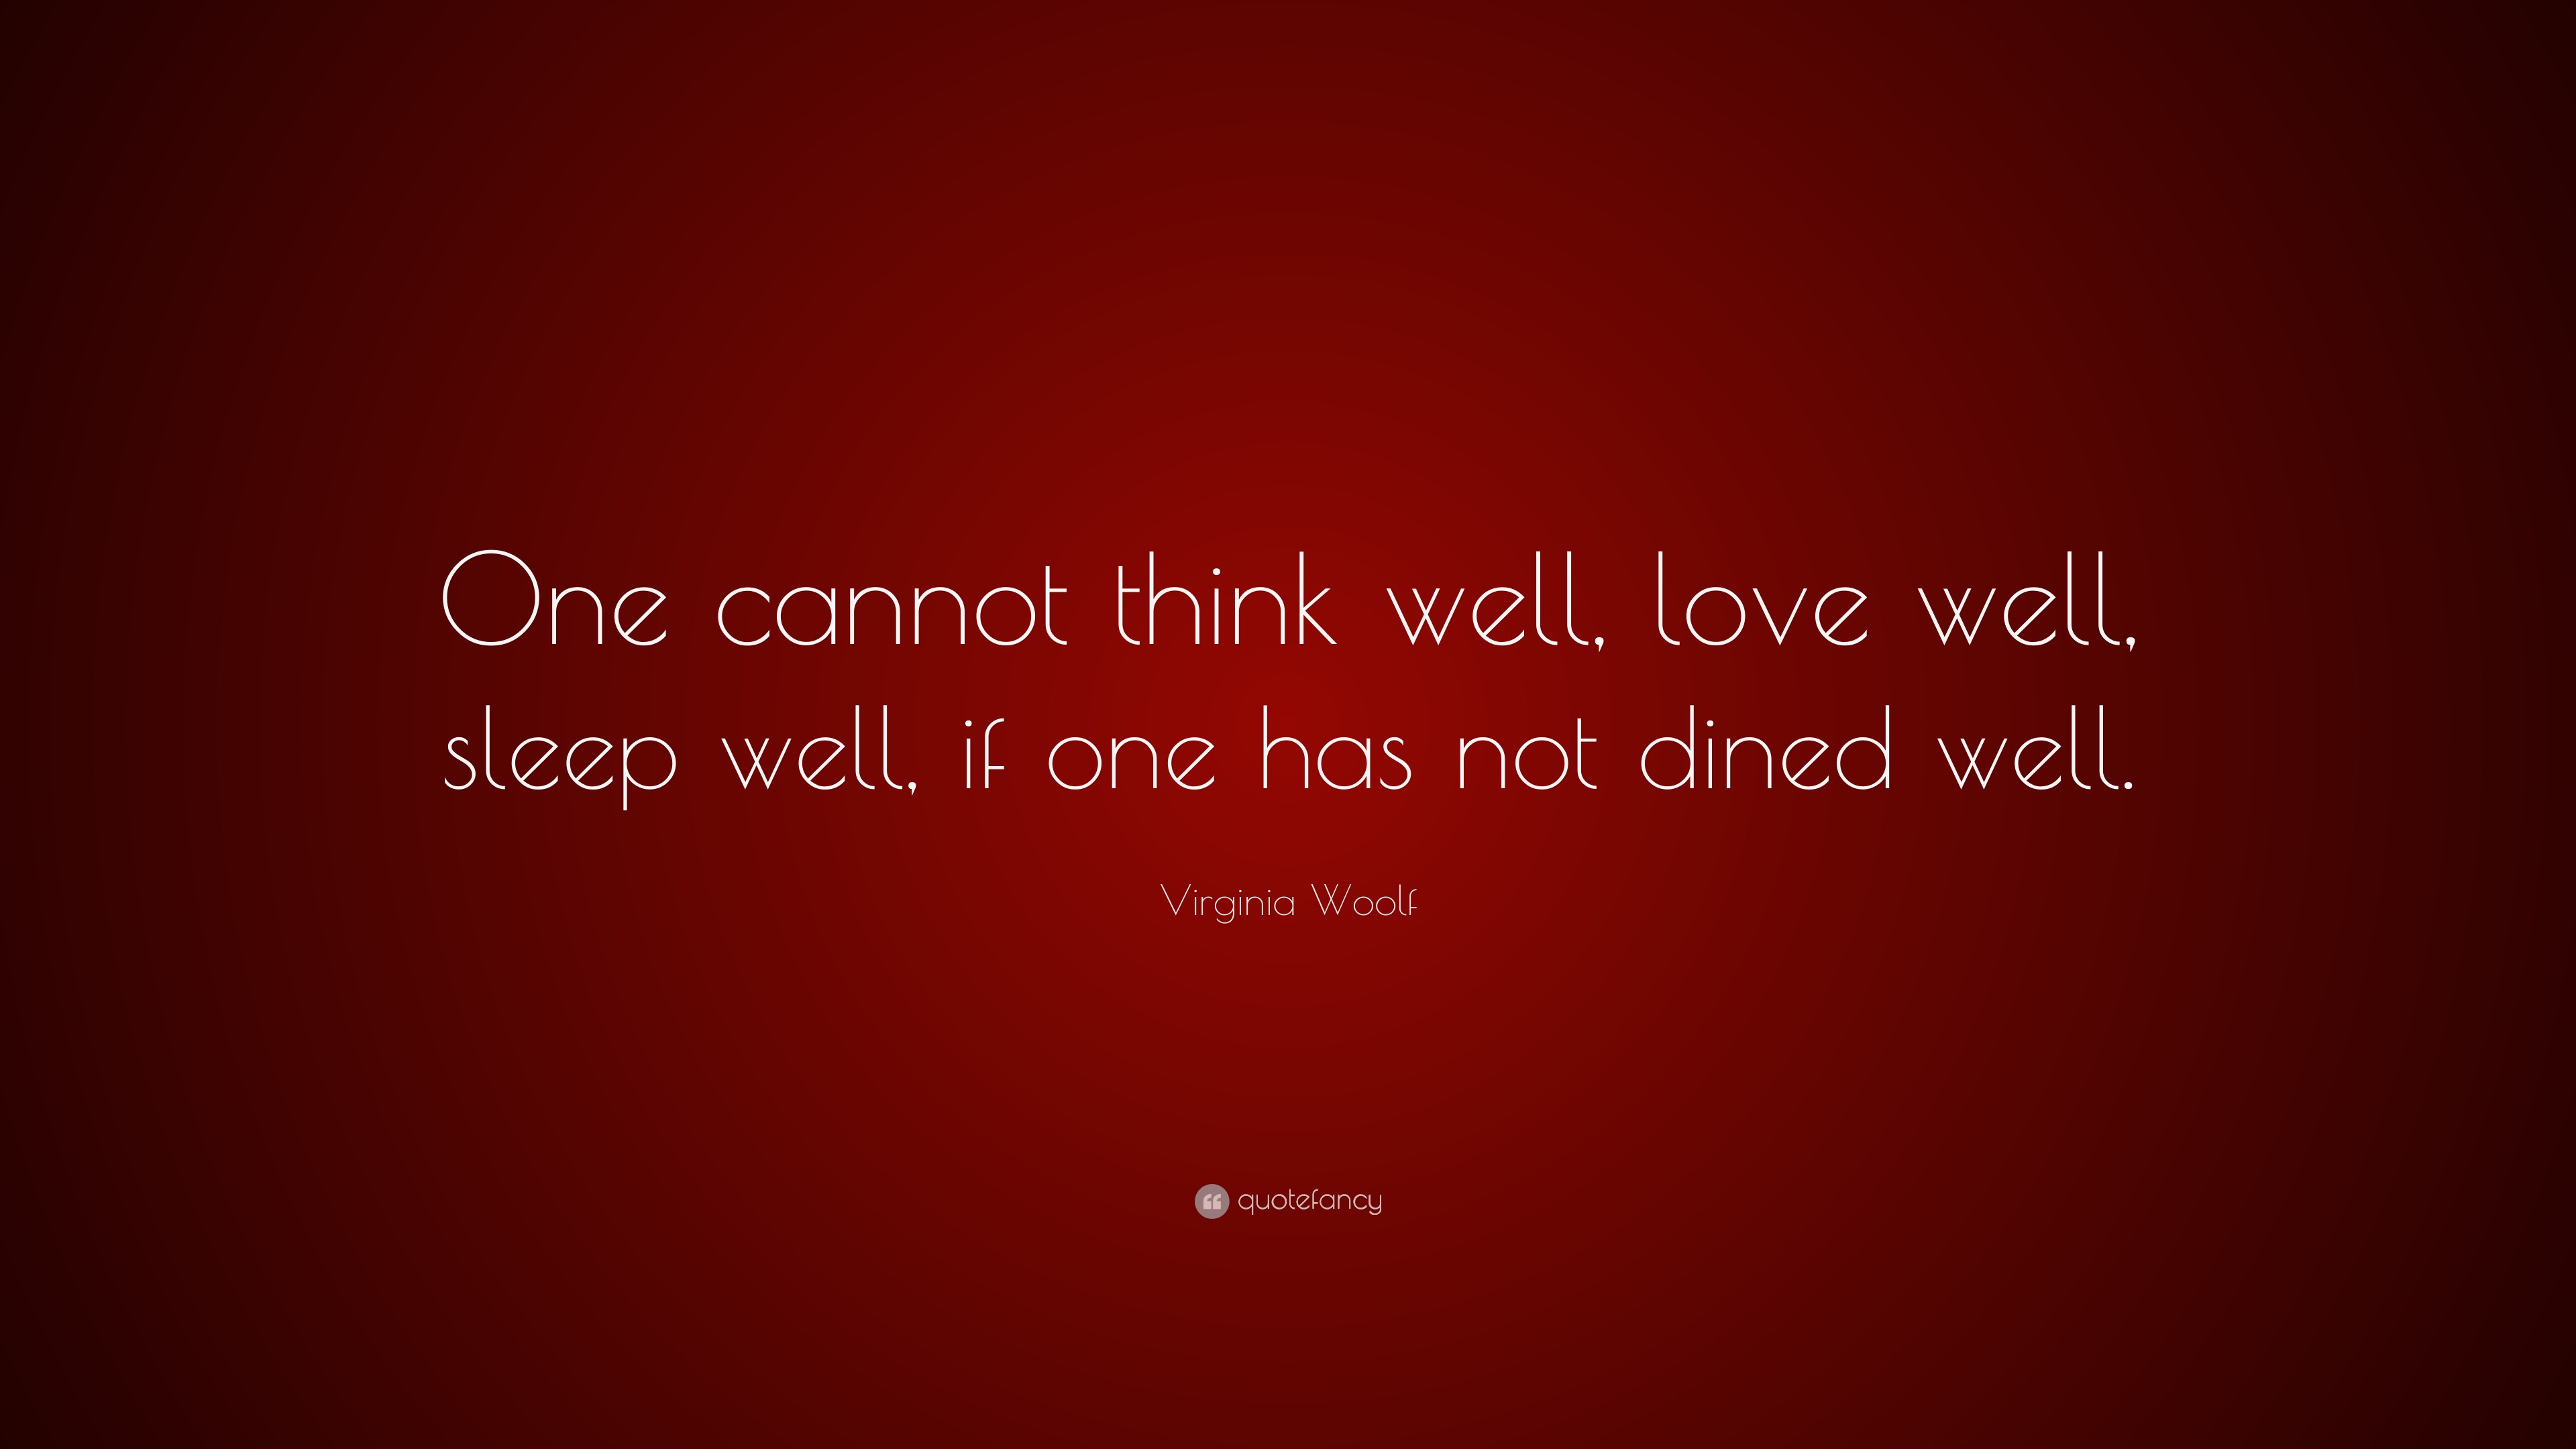 Virginia Woolf Quote One Cannot Think Well Love Well Sleep Well If One Has Not Dined